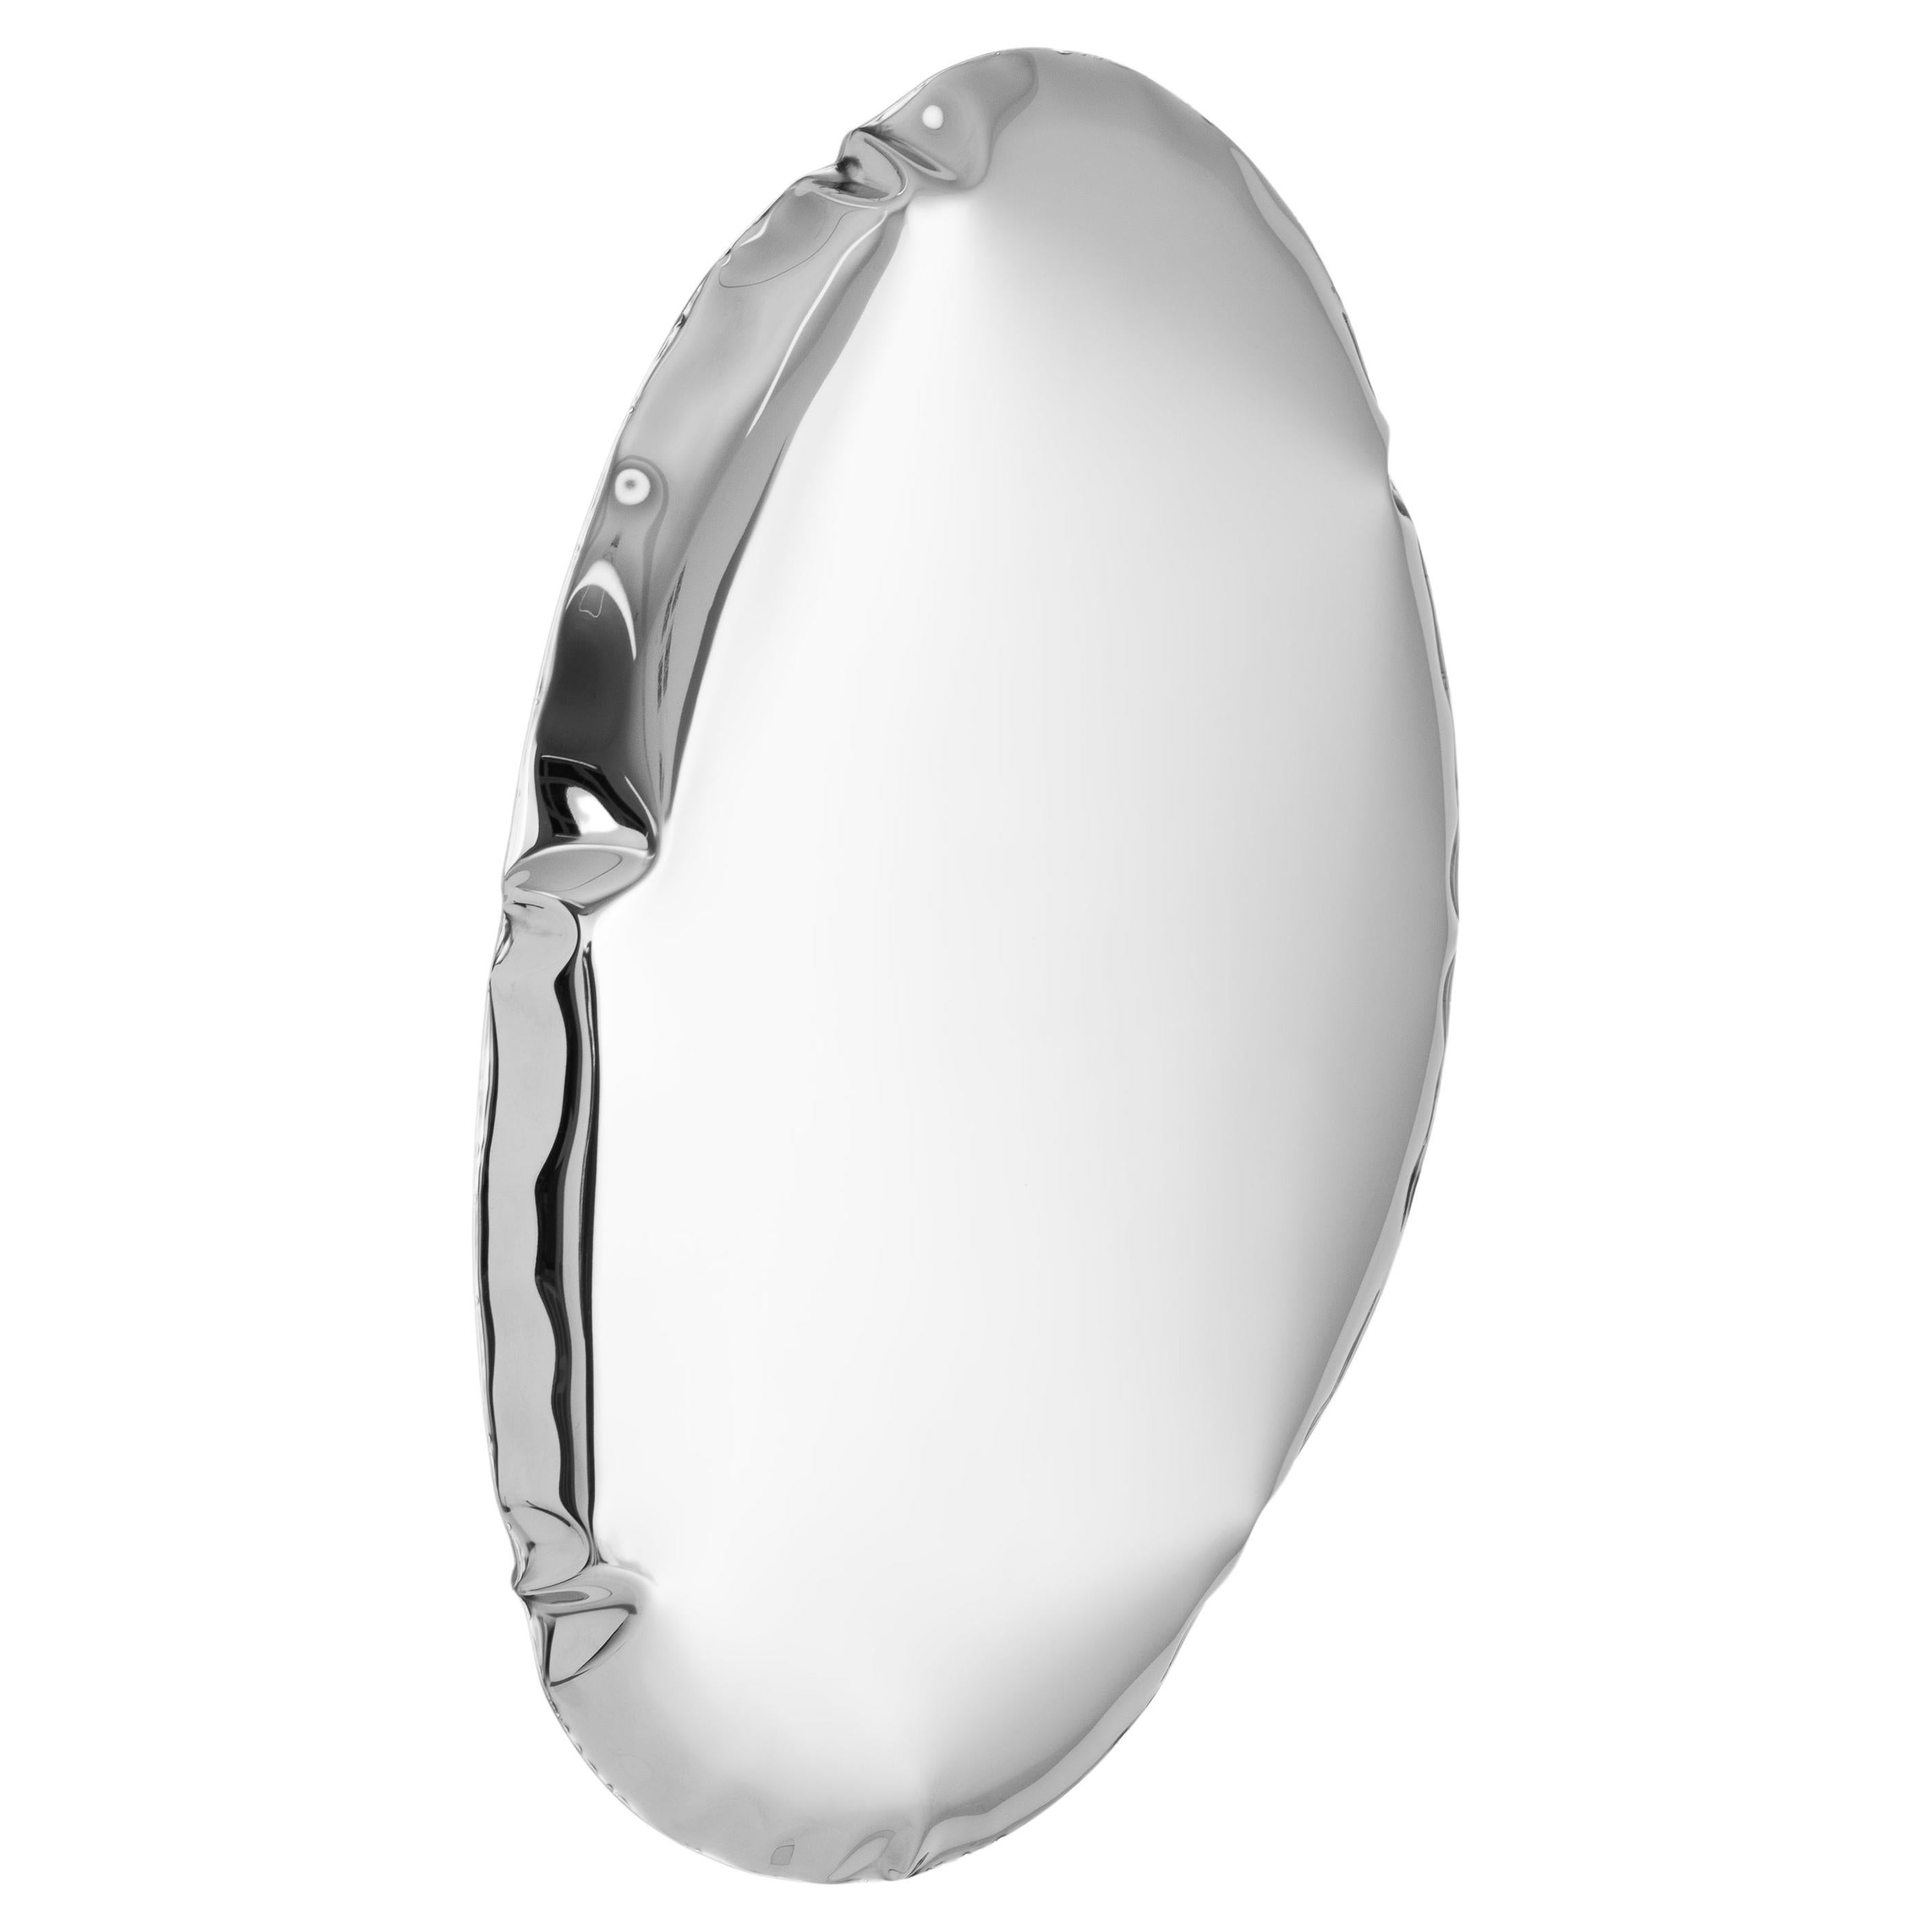 Tafla O5 Polished Stainless Steel Wall Mirror by Zieta For Sale